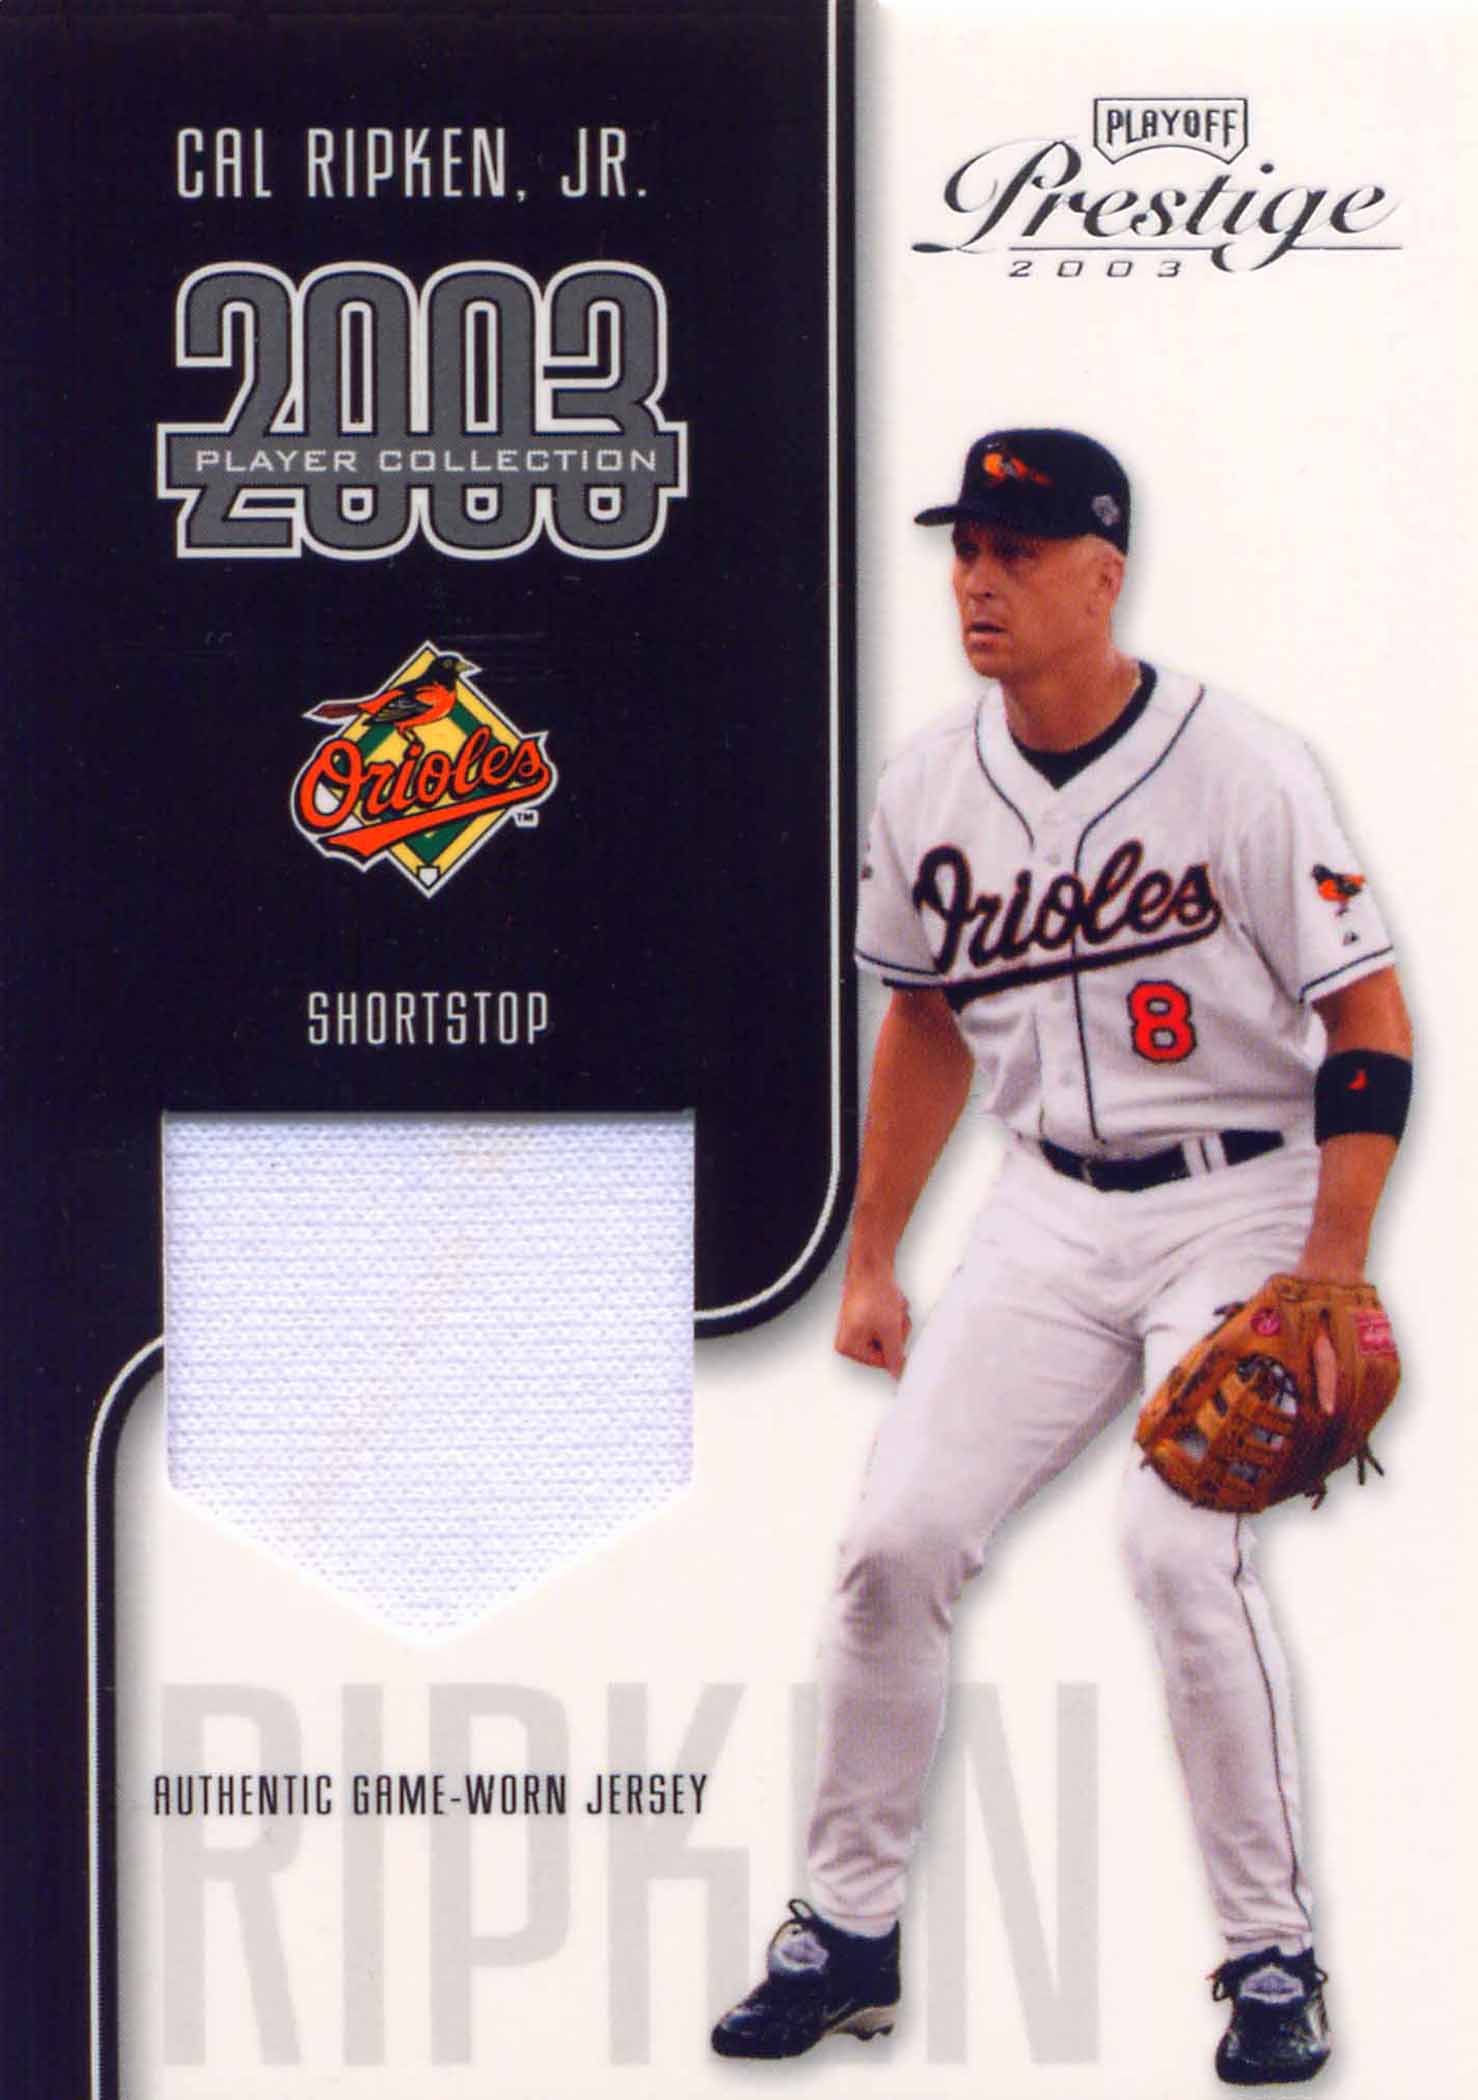 2003 Playoff Prestige Player Collection Jersey